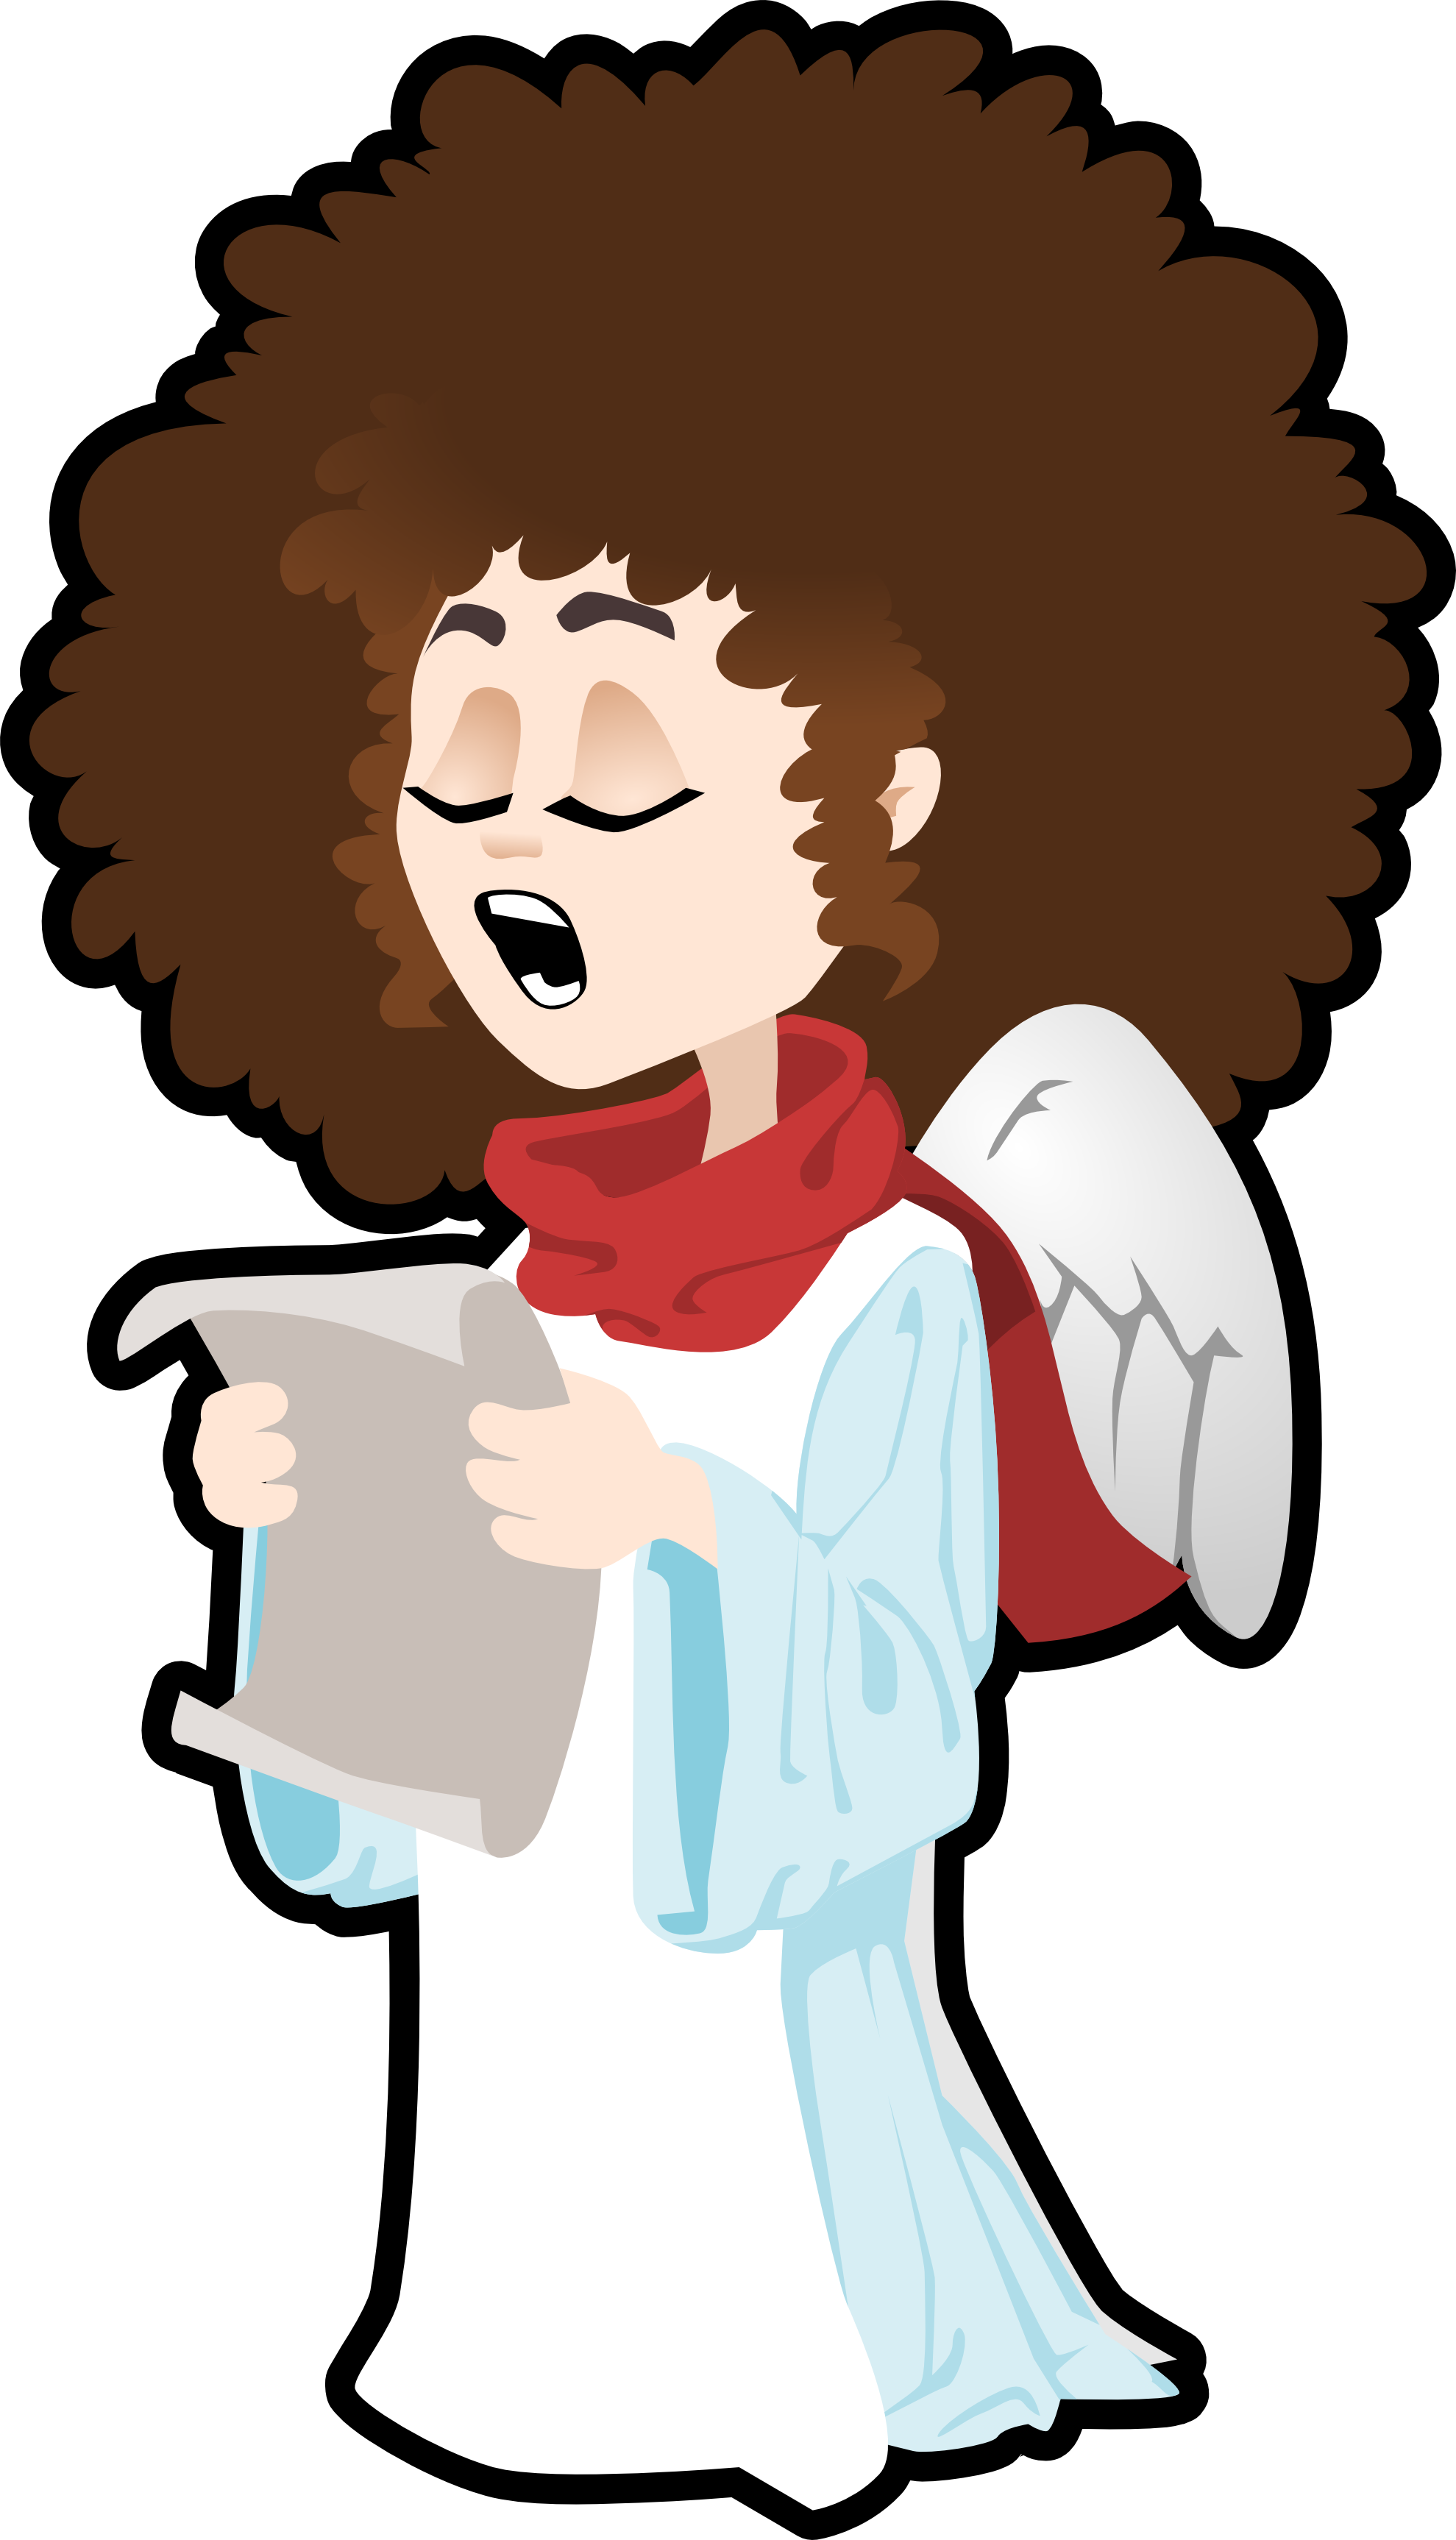 angel clipart free download - photo #25